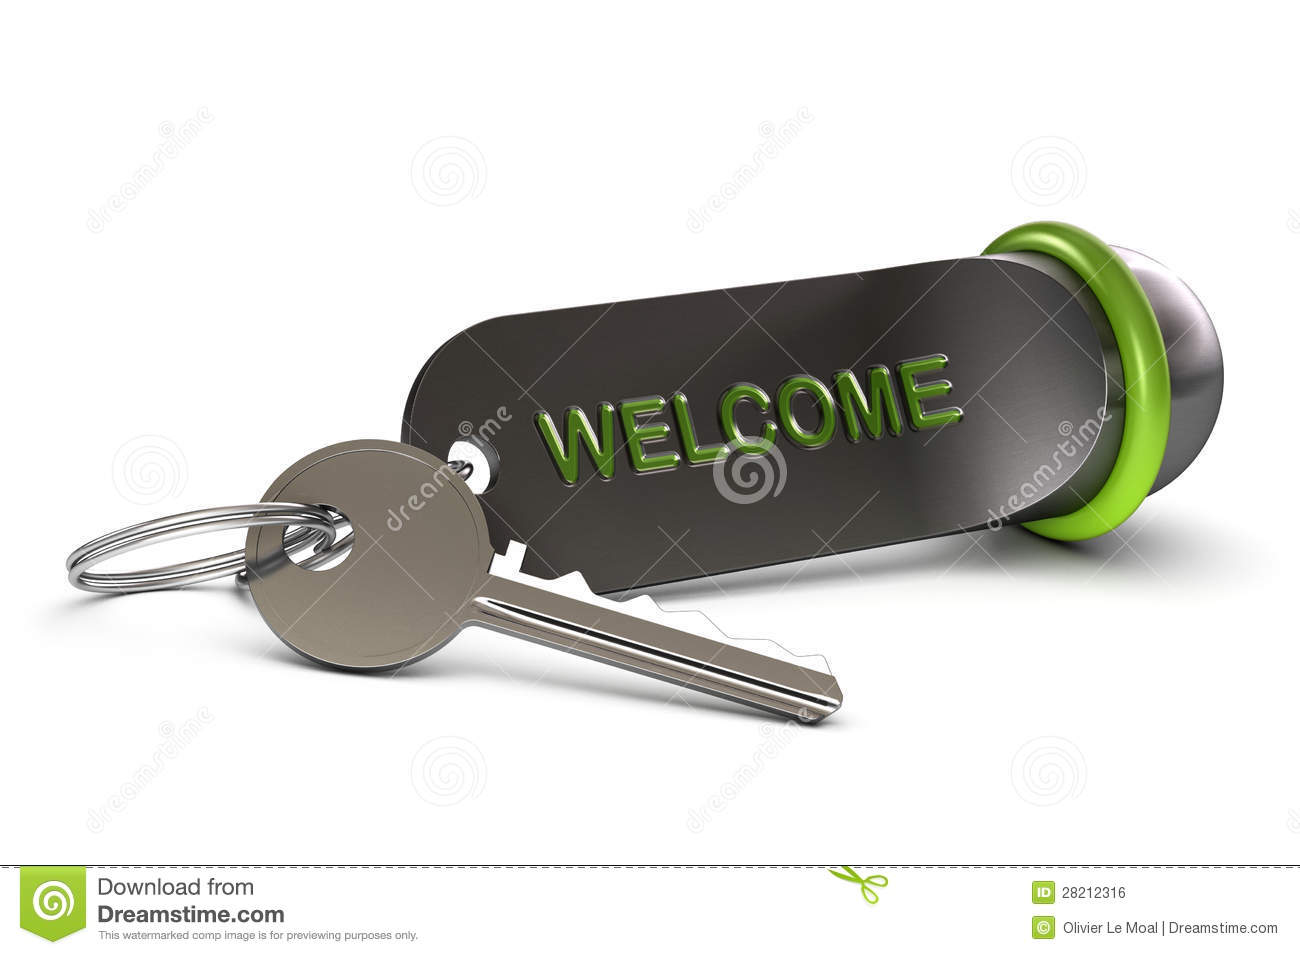 Hotel Key And Green Keyring With The Word Welcome Written On It 